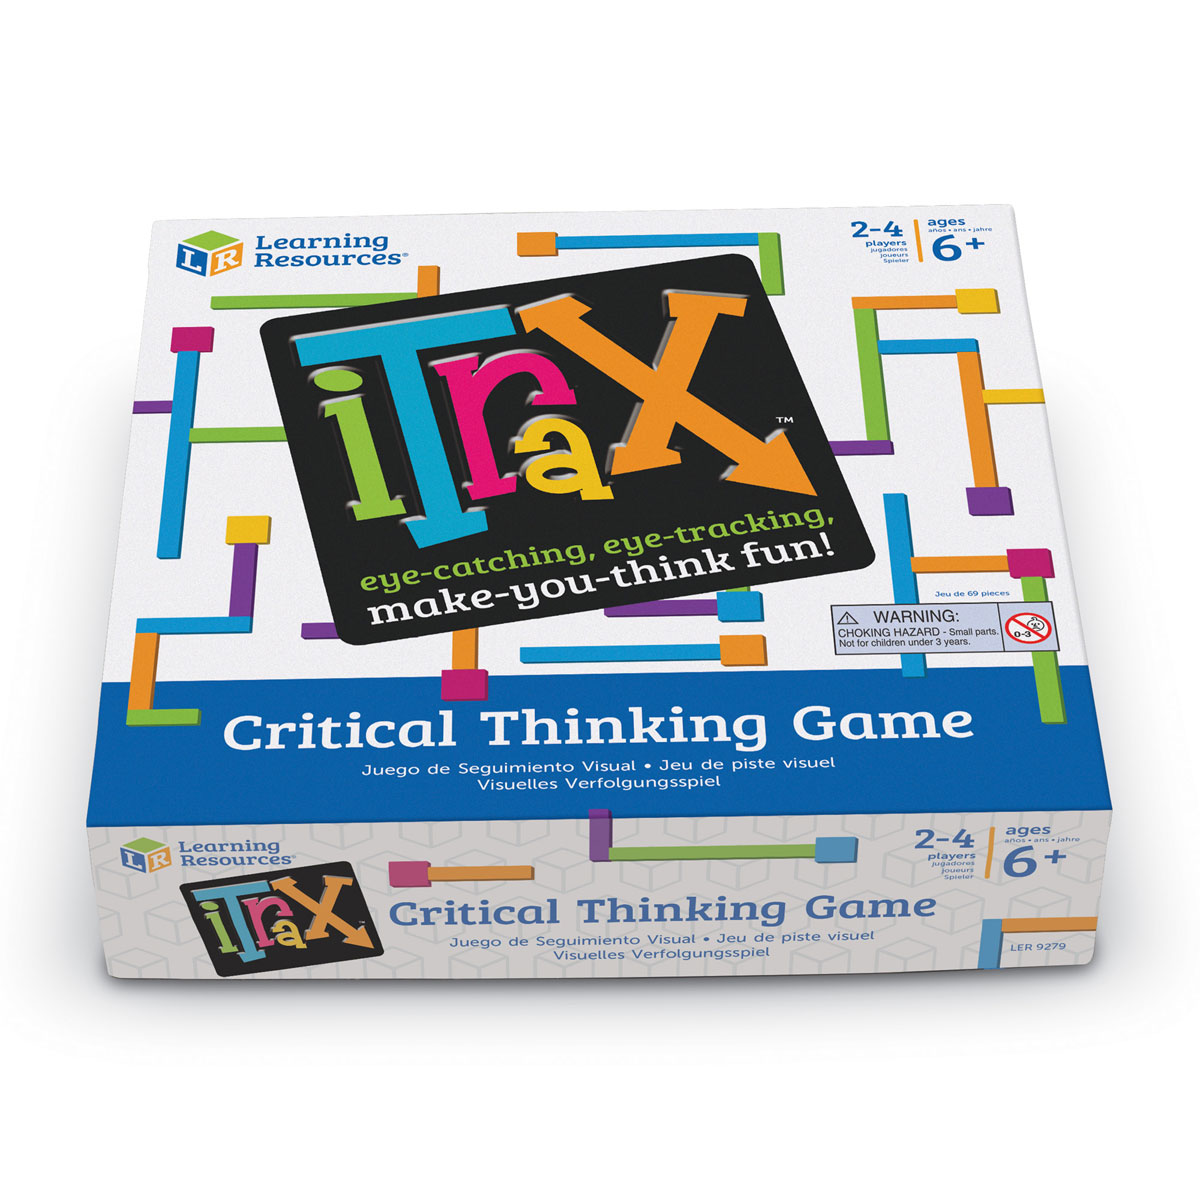 learning resources itrax critical thinking game